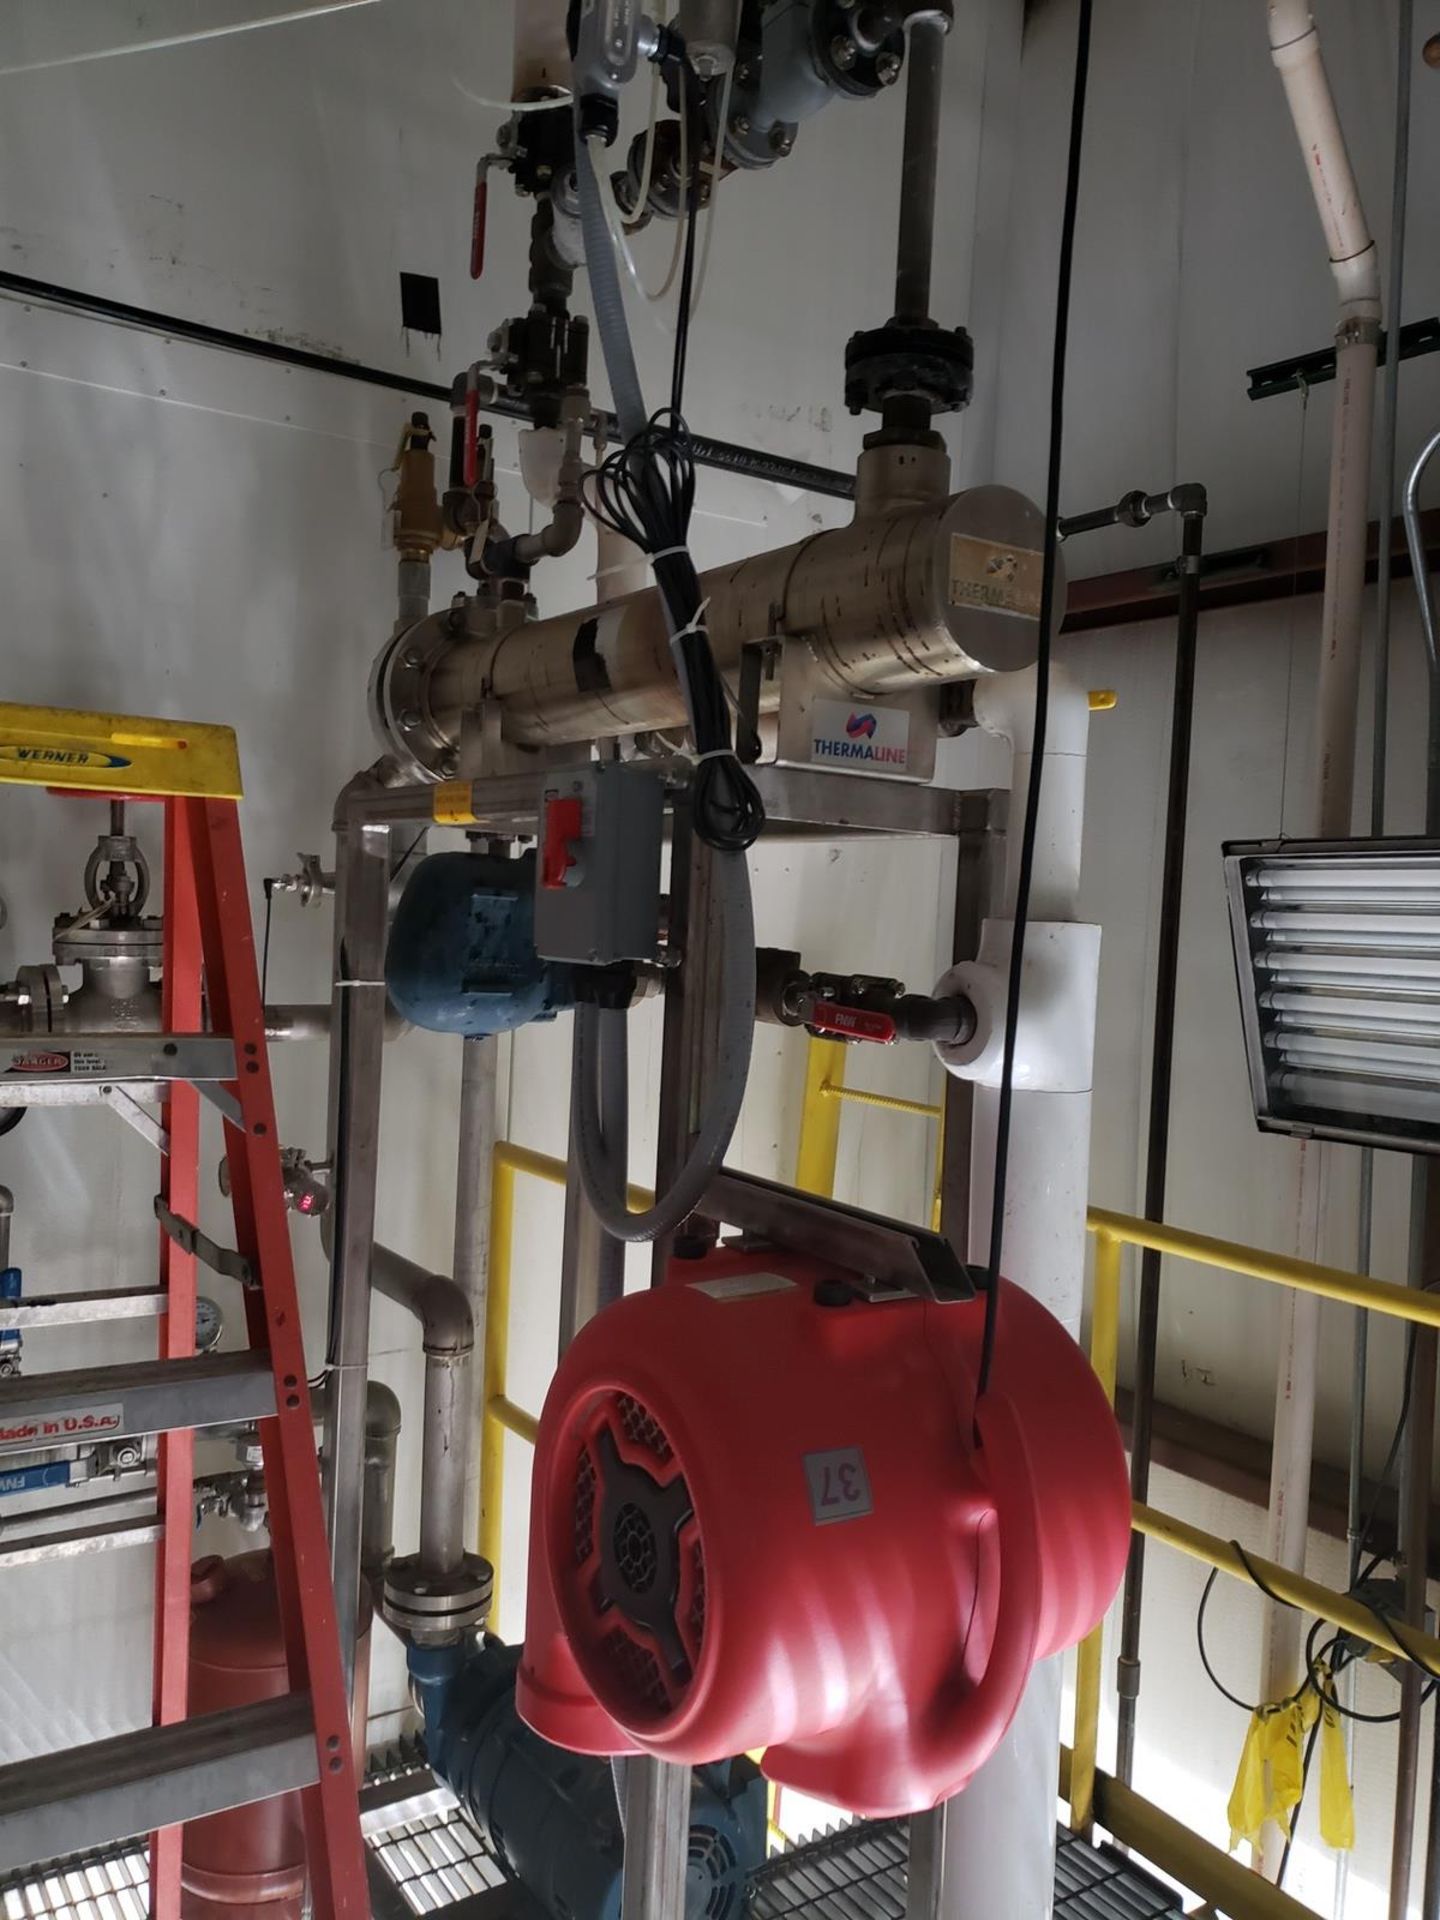 Contents of Corn Syrup Pumping/Control Room | Rig Fee $3500 - Image 6 of 12